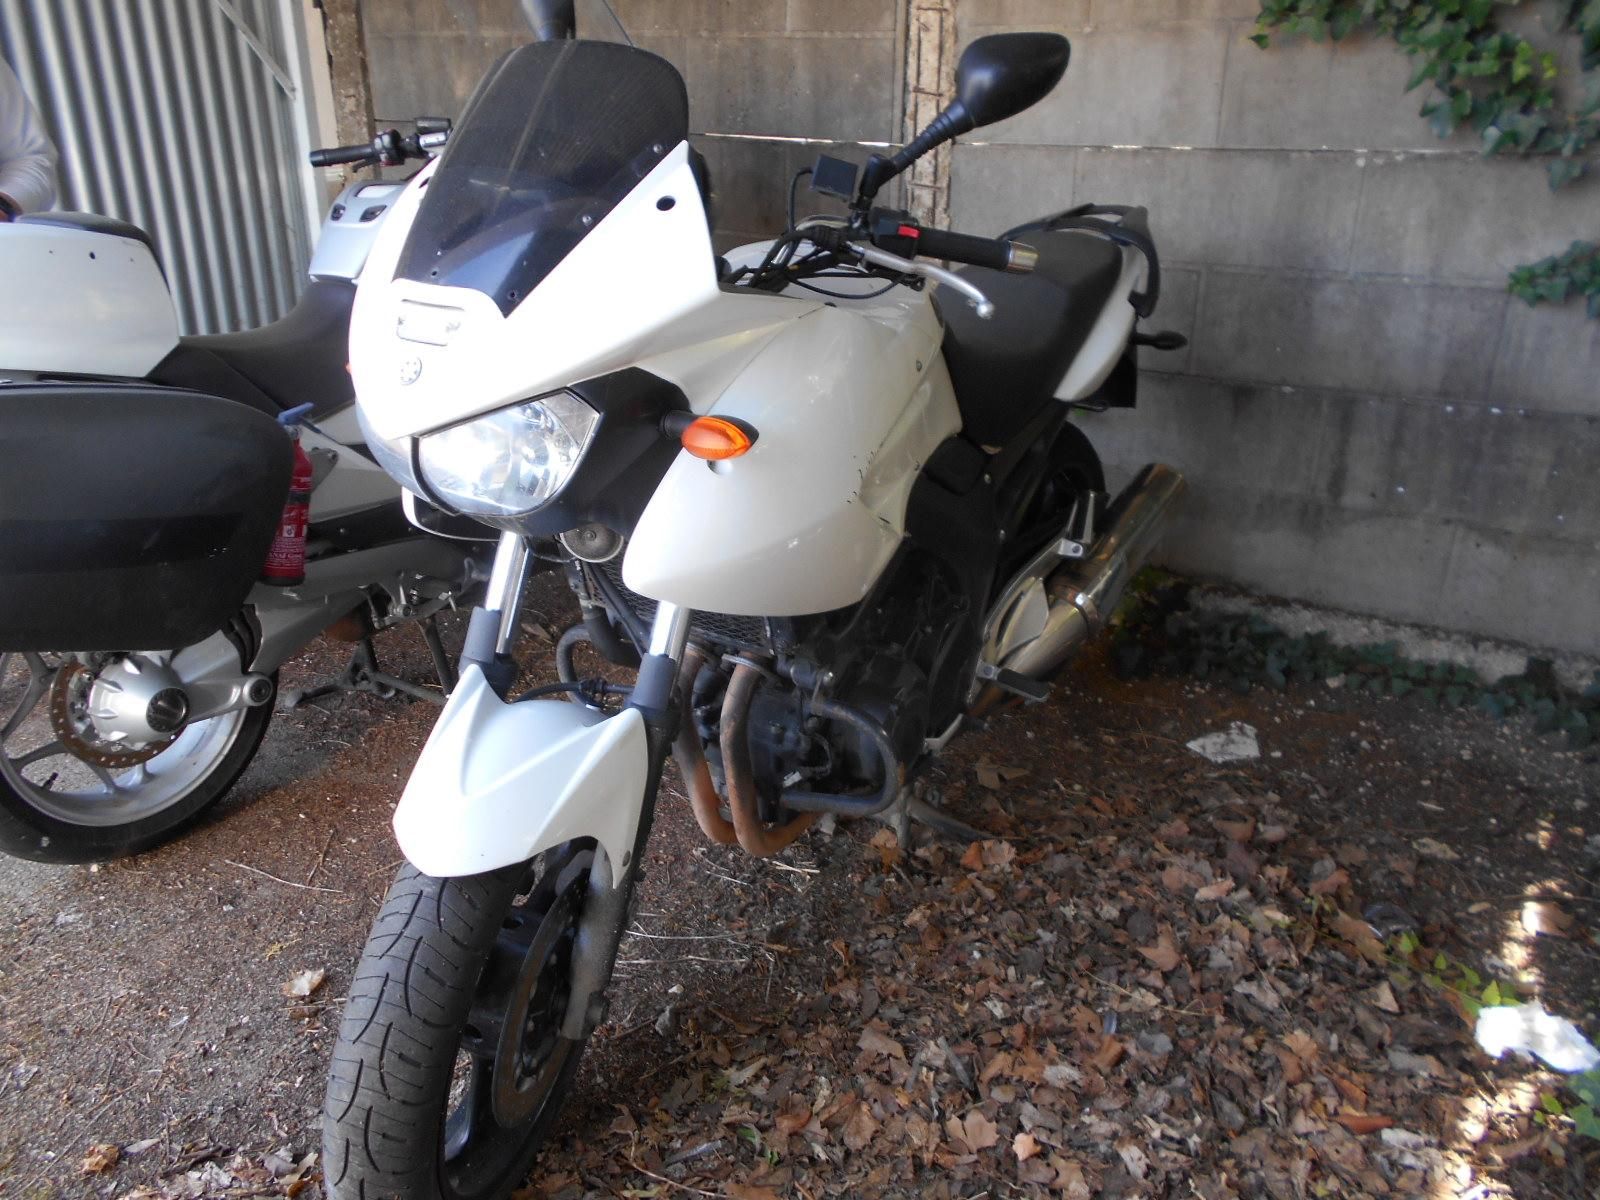 Null 
Motorcycle BMW F 650 GS Gasoline, imm. DM-503-FG, type F650, serial number&hellip;